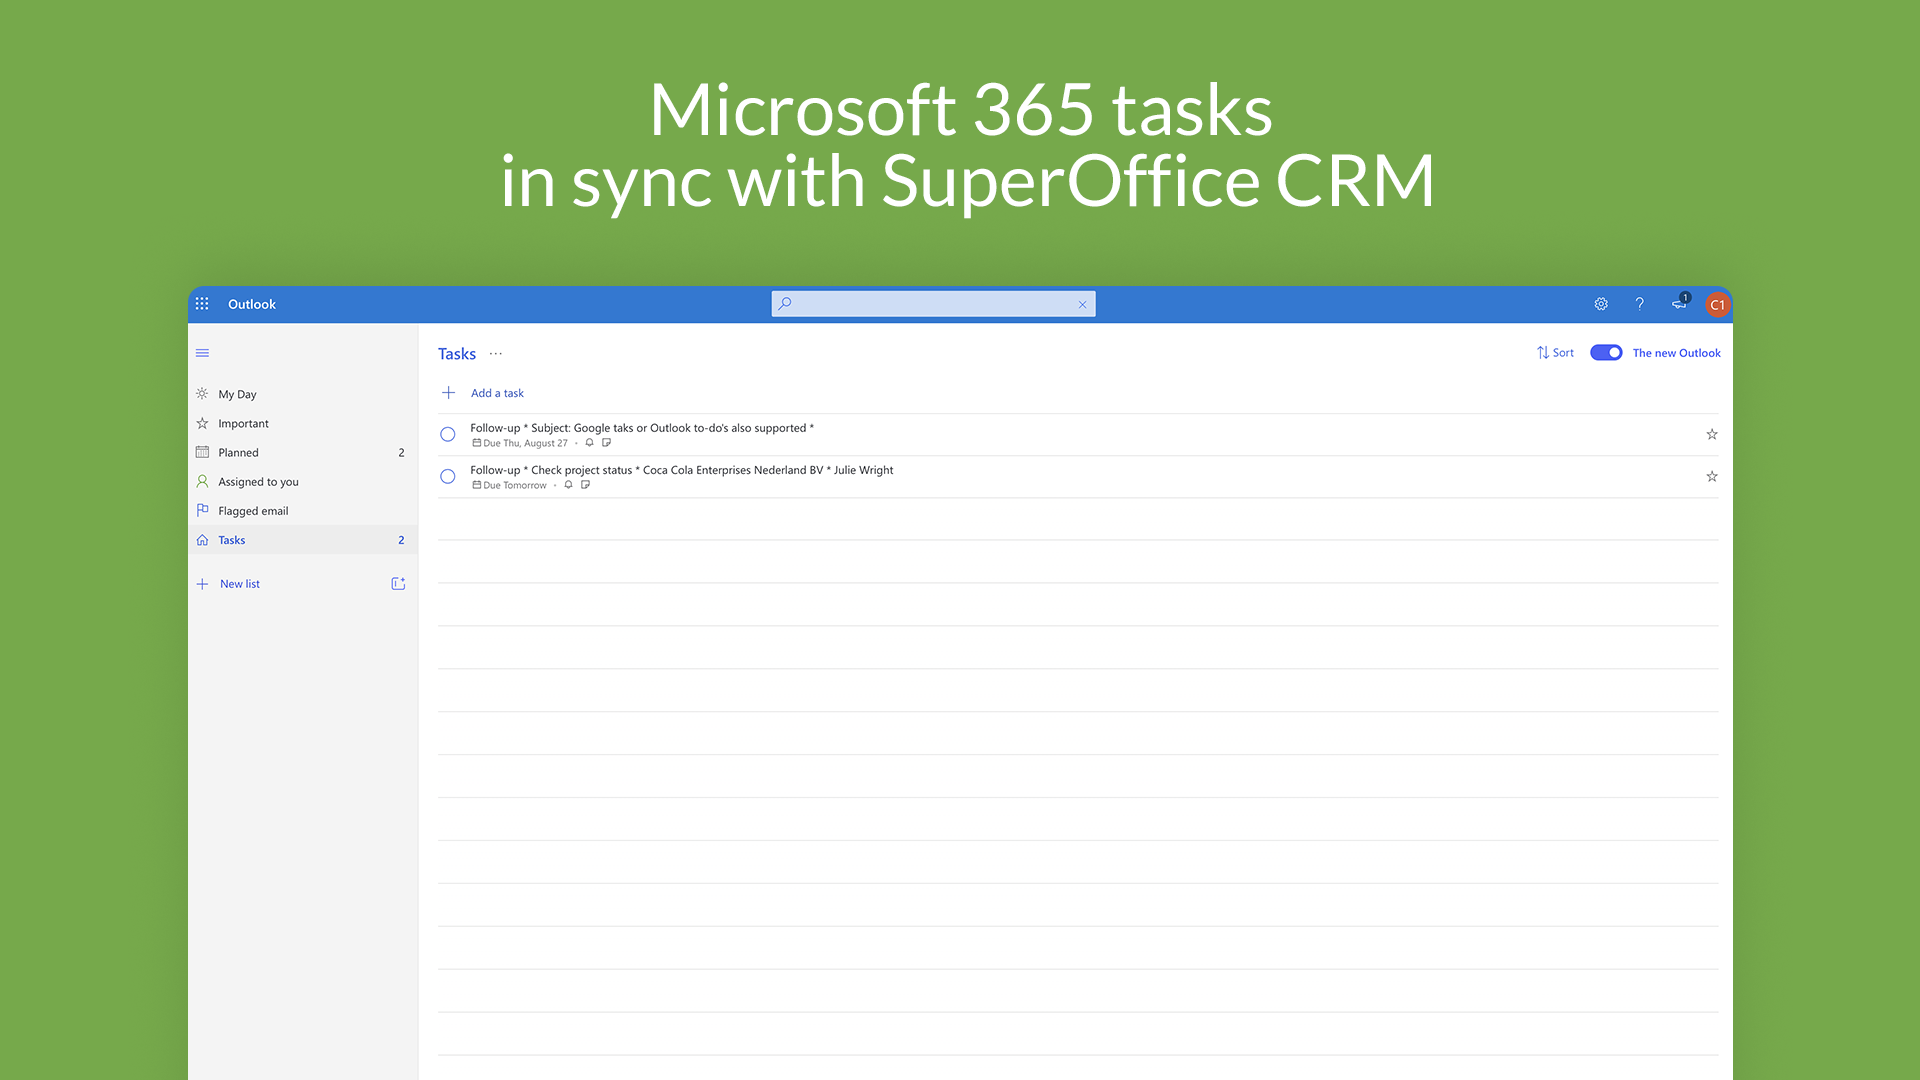 Microsoft 365 tasks in sync with SuperOffice CRM